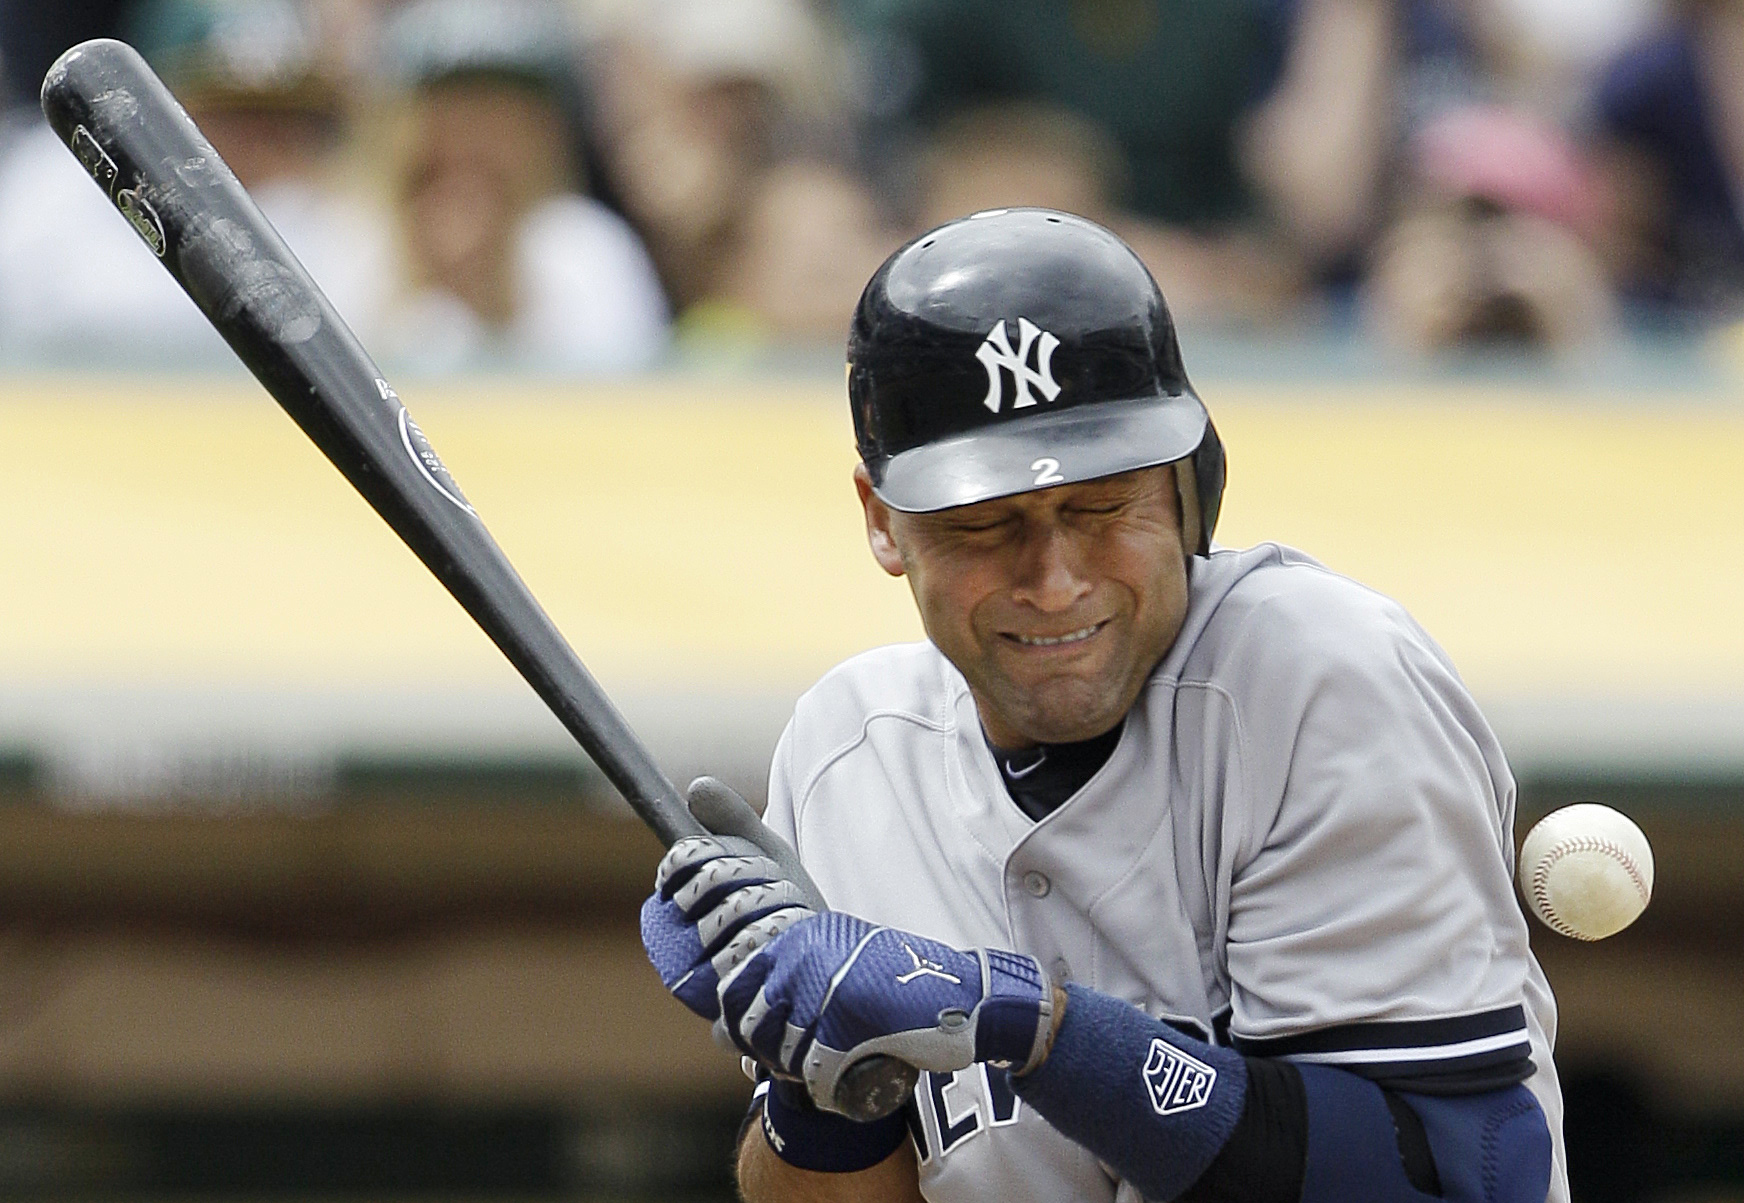 Which team drafted Derek Jeter out of high school in 1992?